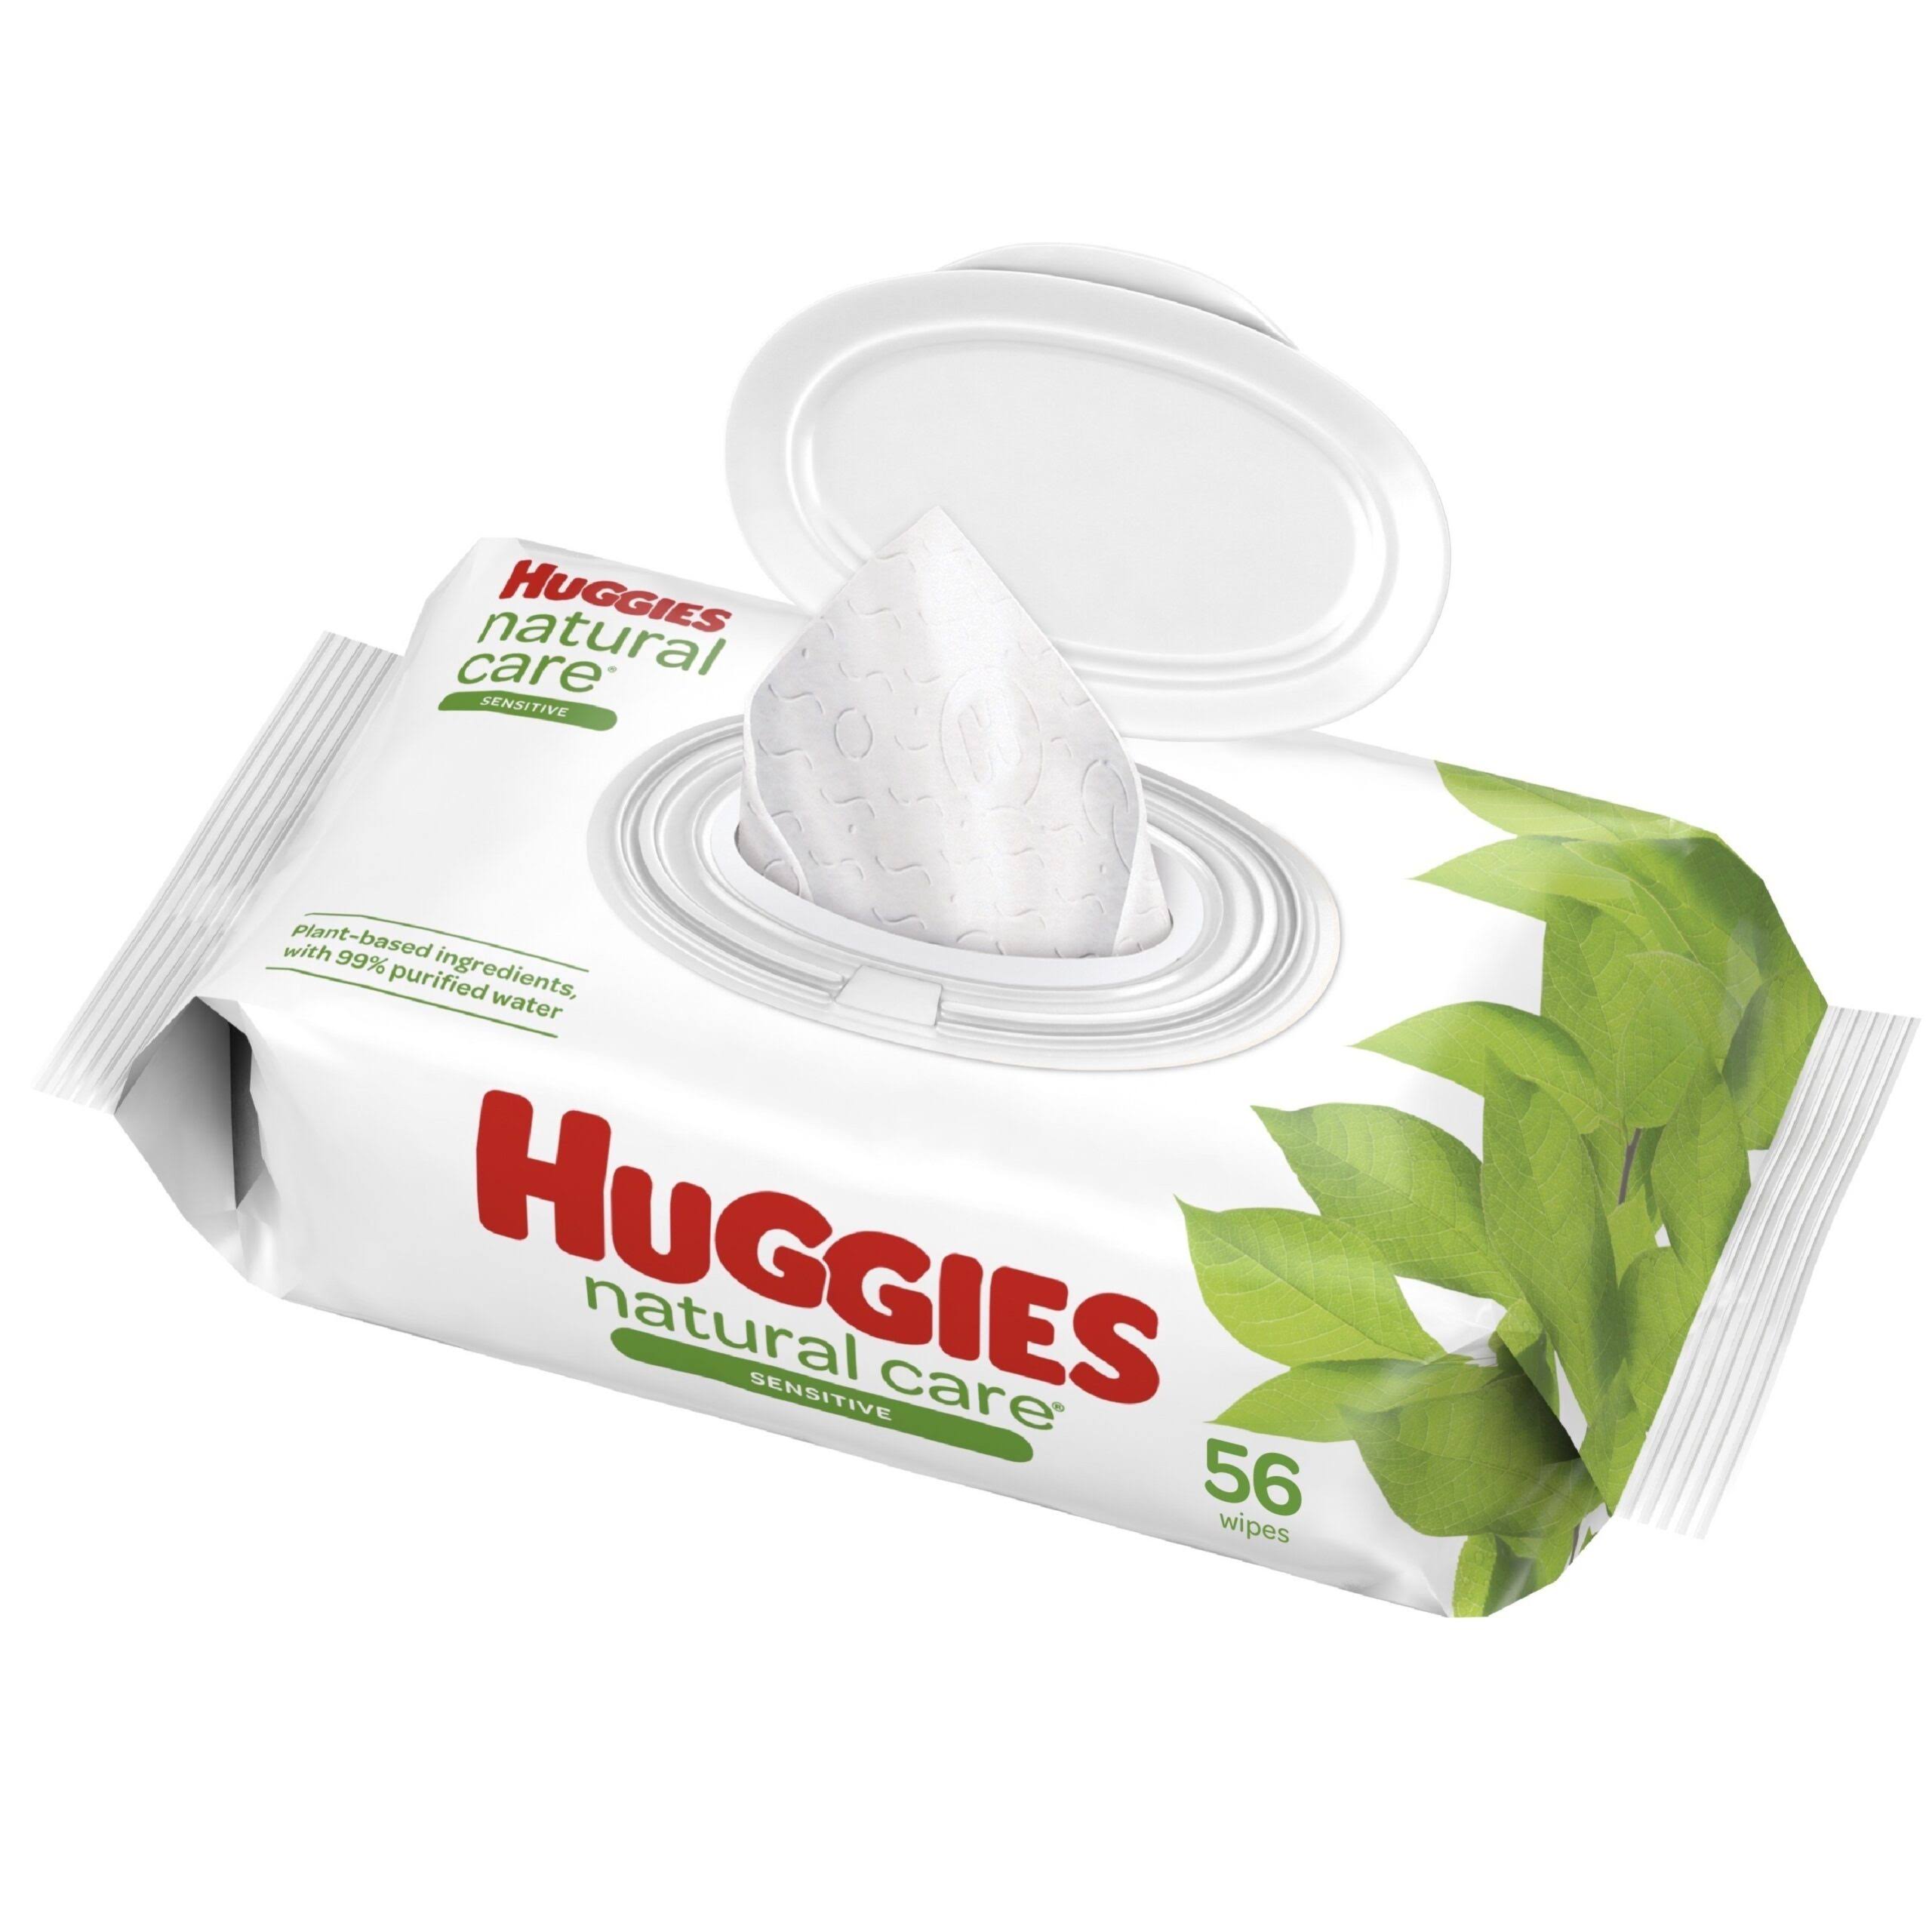 Huggies Natural Care Baby Wipes - Flip Top, Unscented, 56ct